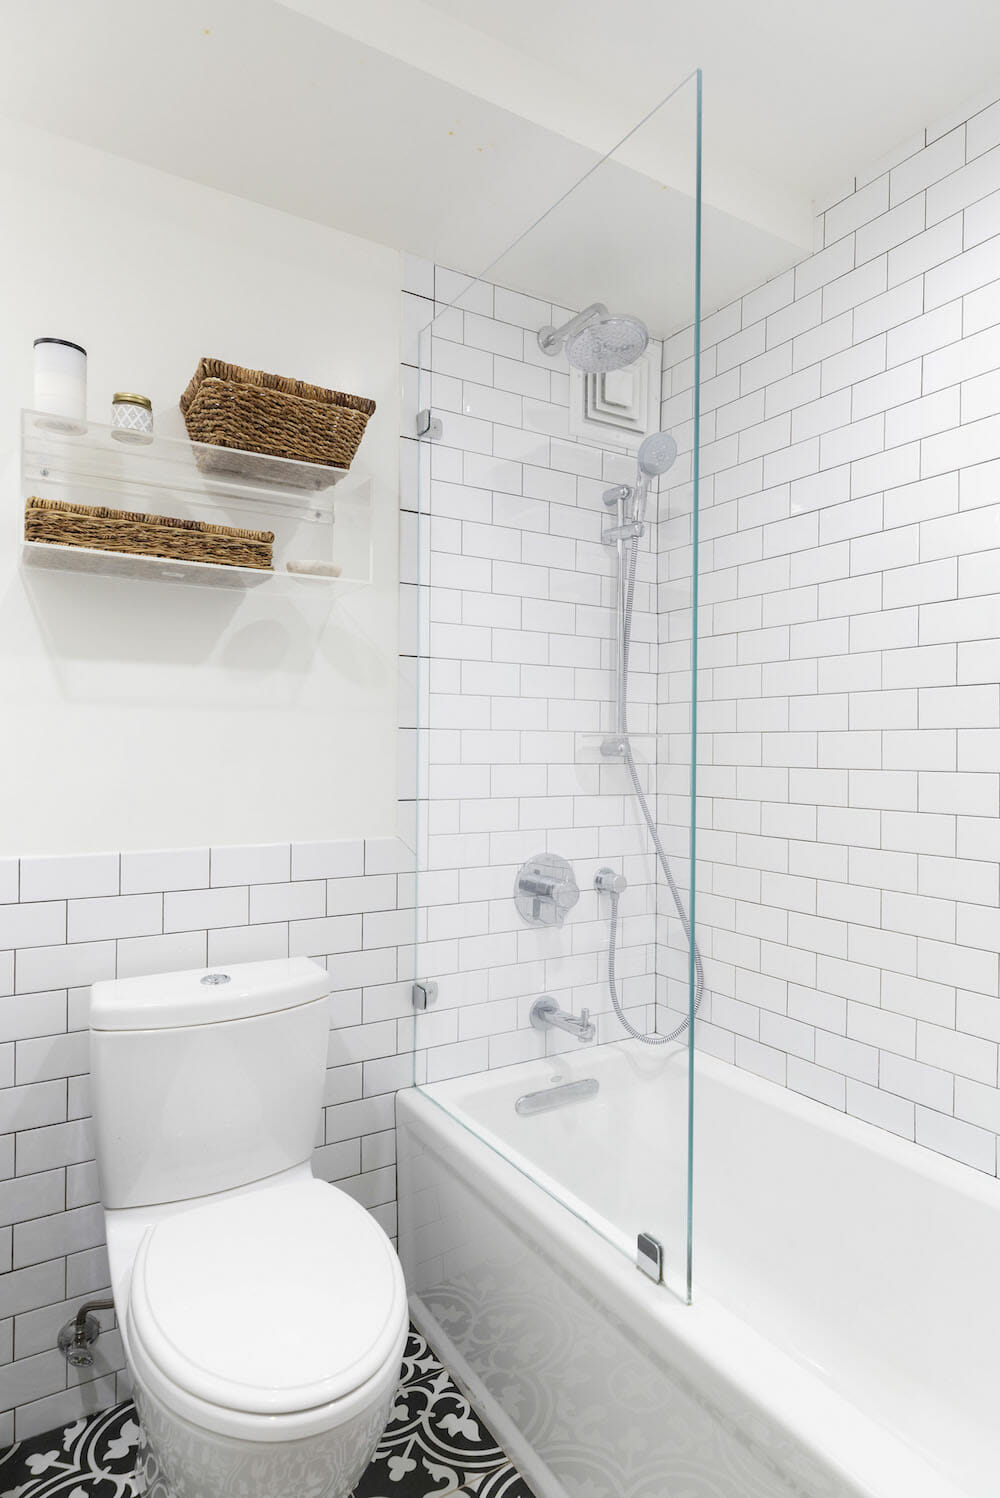 Image of a Clinton Hill bathroom with white subway tile and bathtub